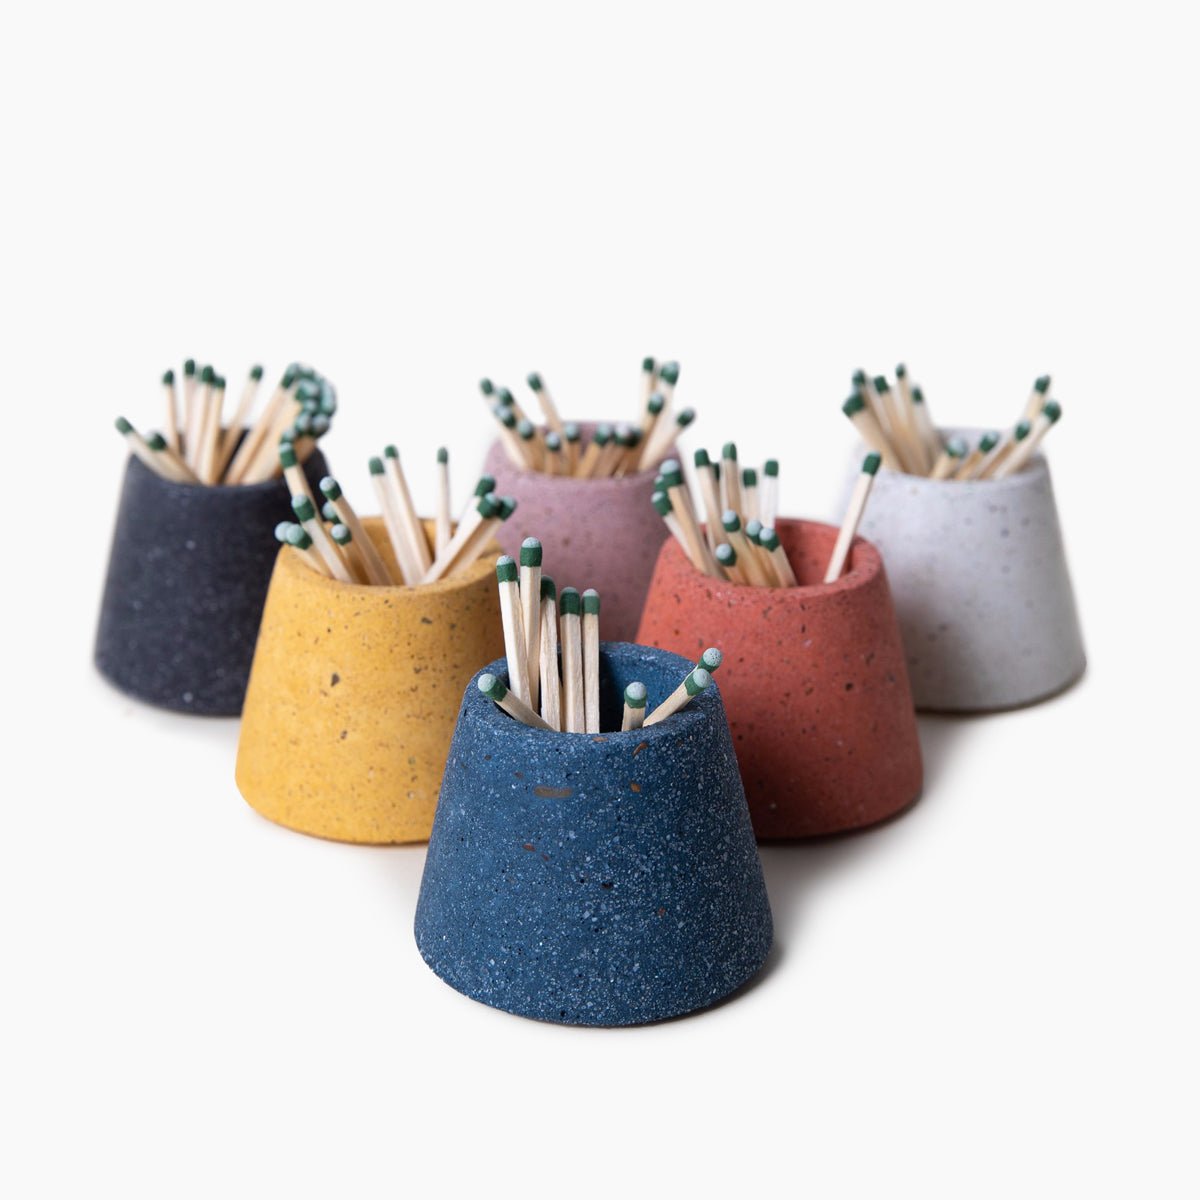 Terrazzo matchstick holders in assorted colors. Made by Pretti.Cool in Houston, Texas.